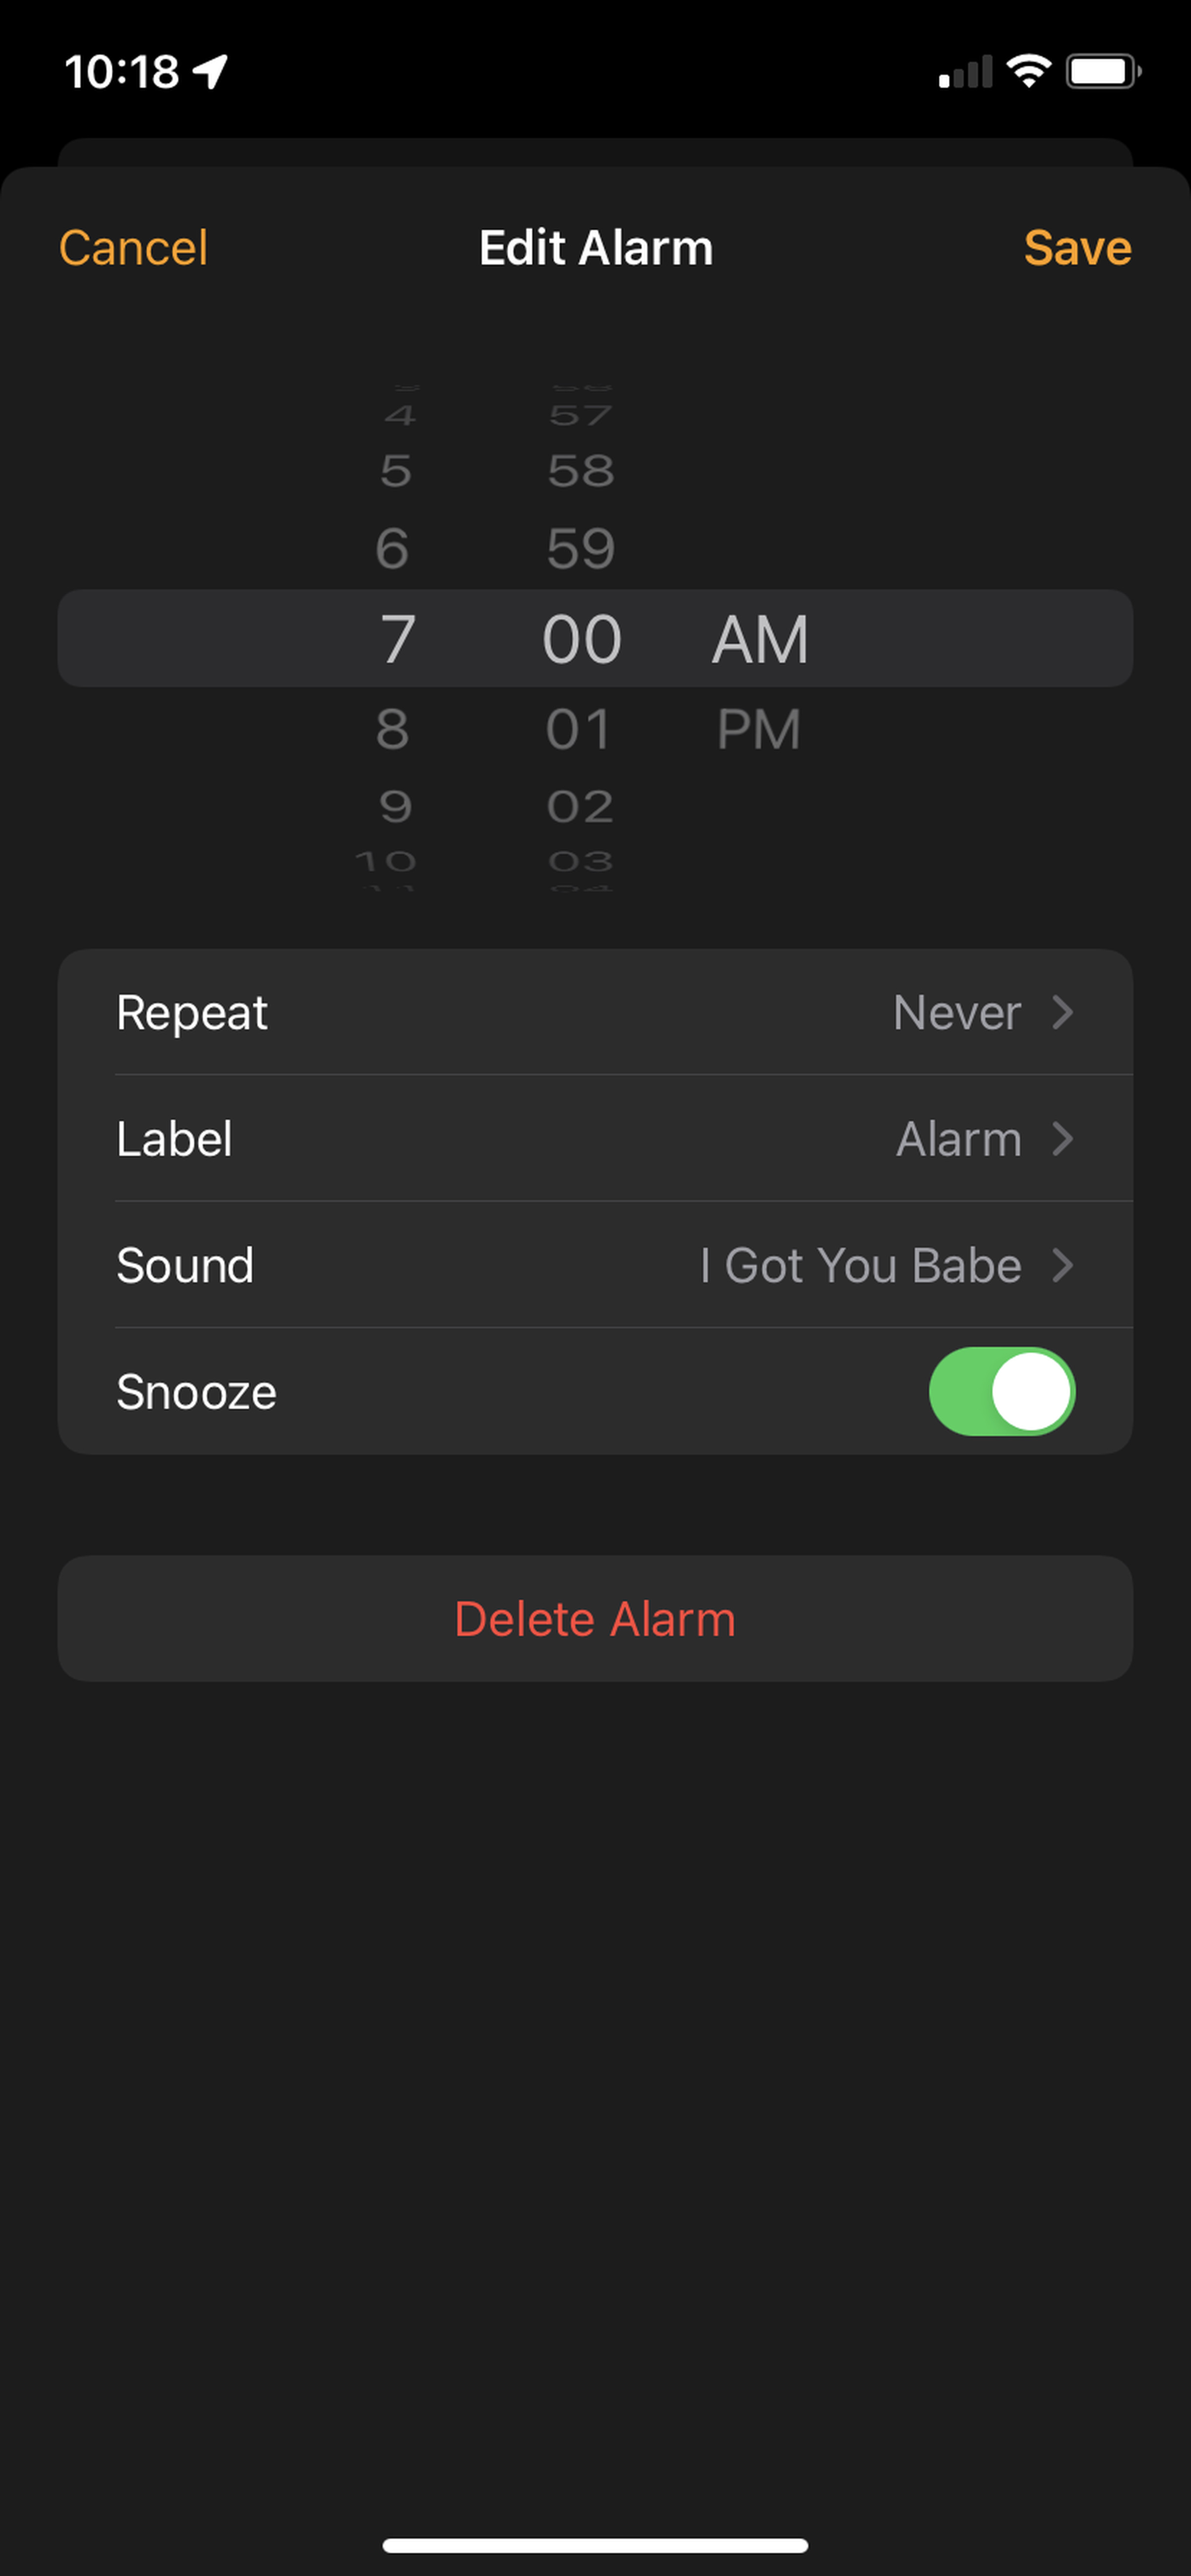 This ringtone was $1.29. Setting it as my alarm and annoying my spouse every morning? Priceless.